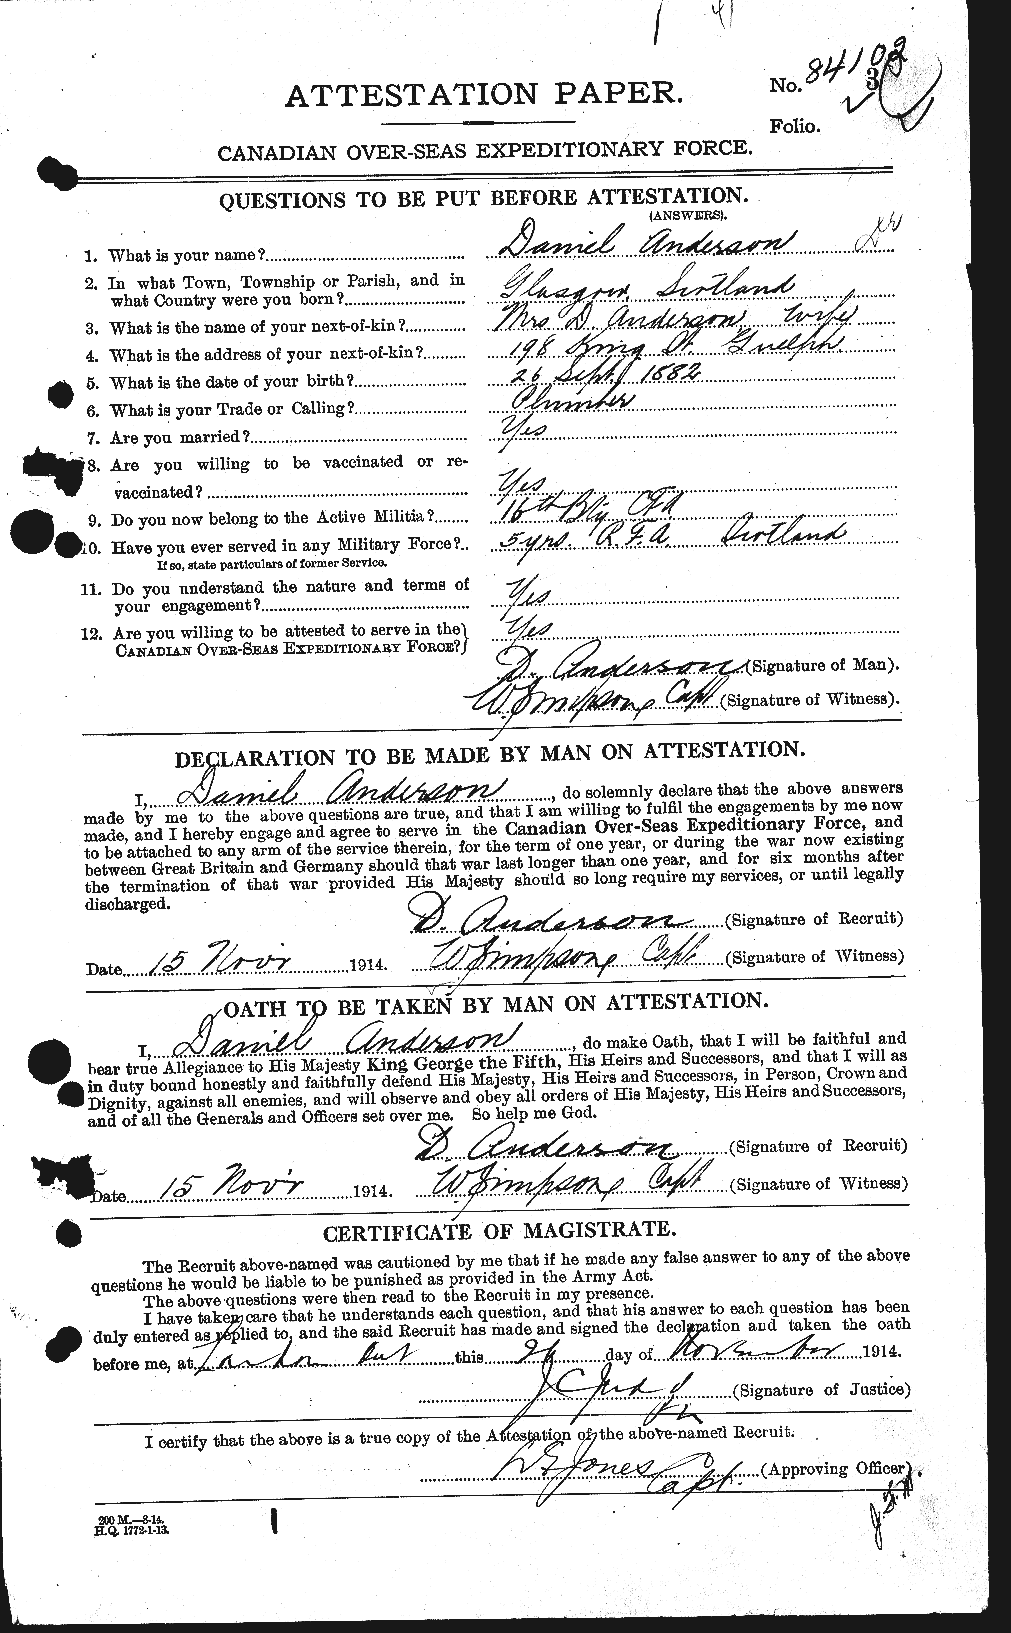 Personnel Records of the First World War - CEF 210047a